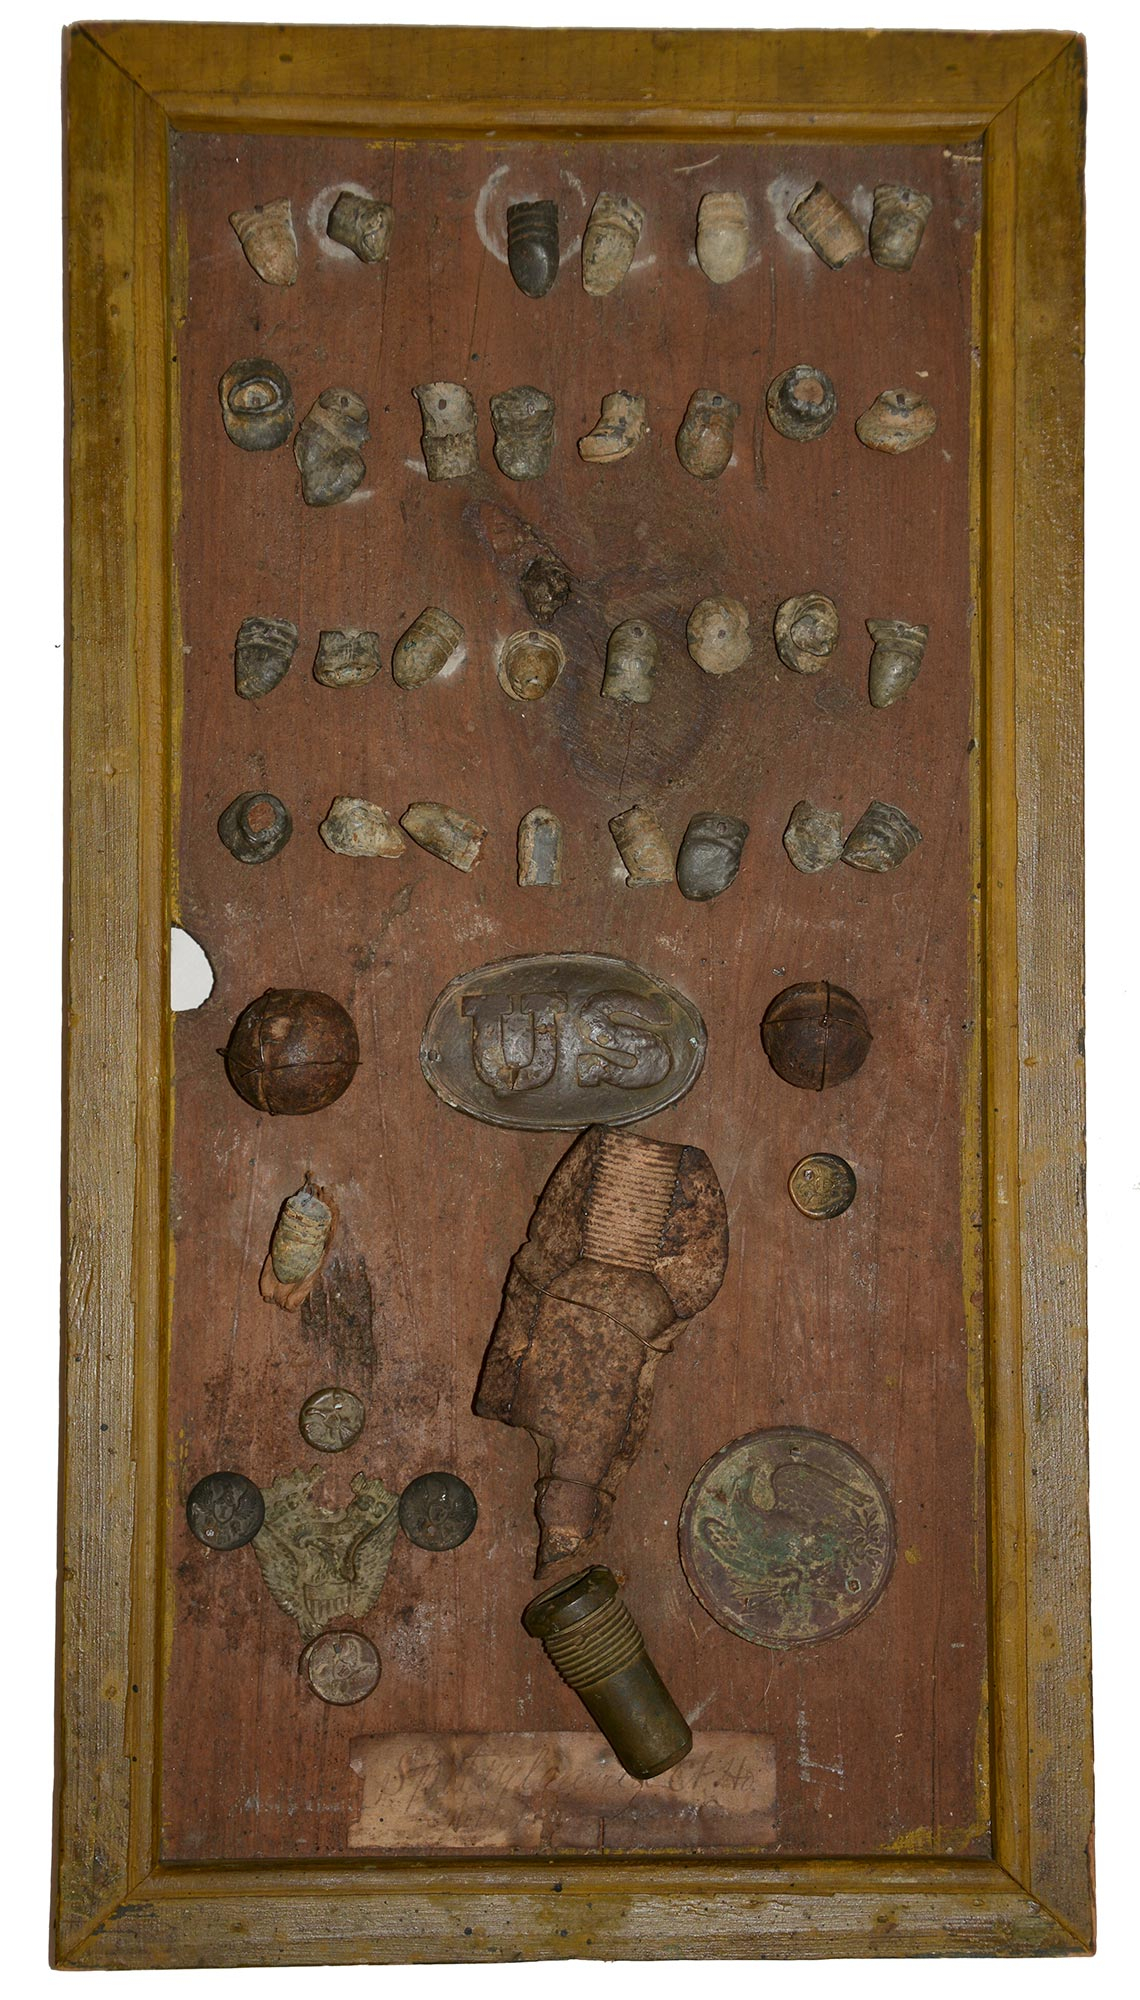 OLD RELIC BOARD FROM SPOTSYLVANIA COURT HOUSE